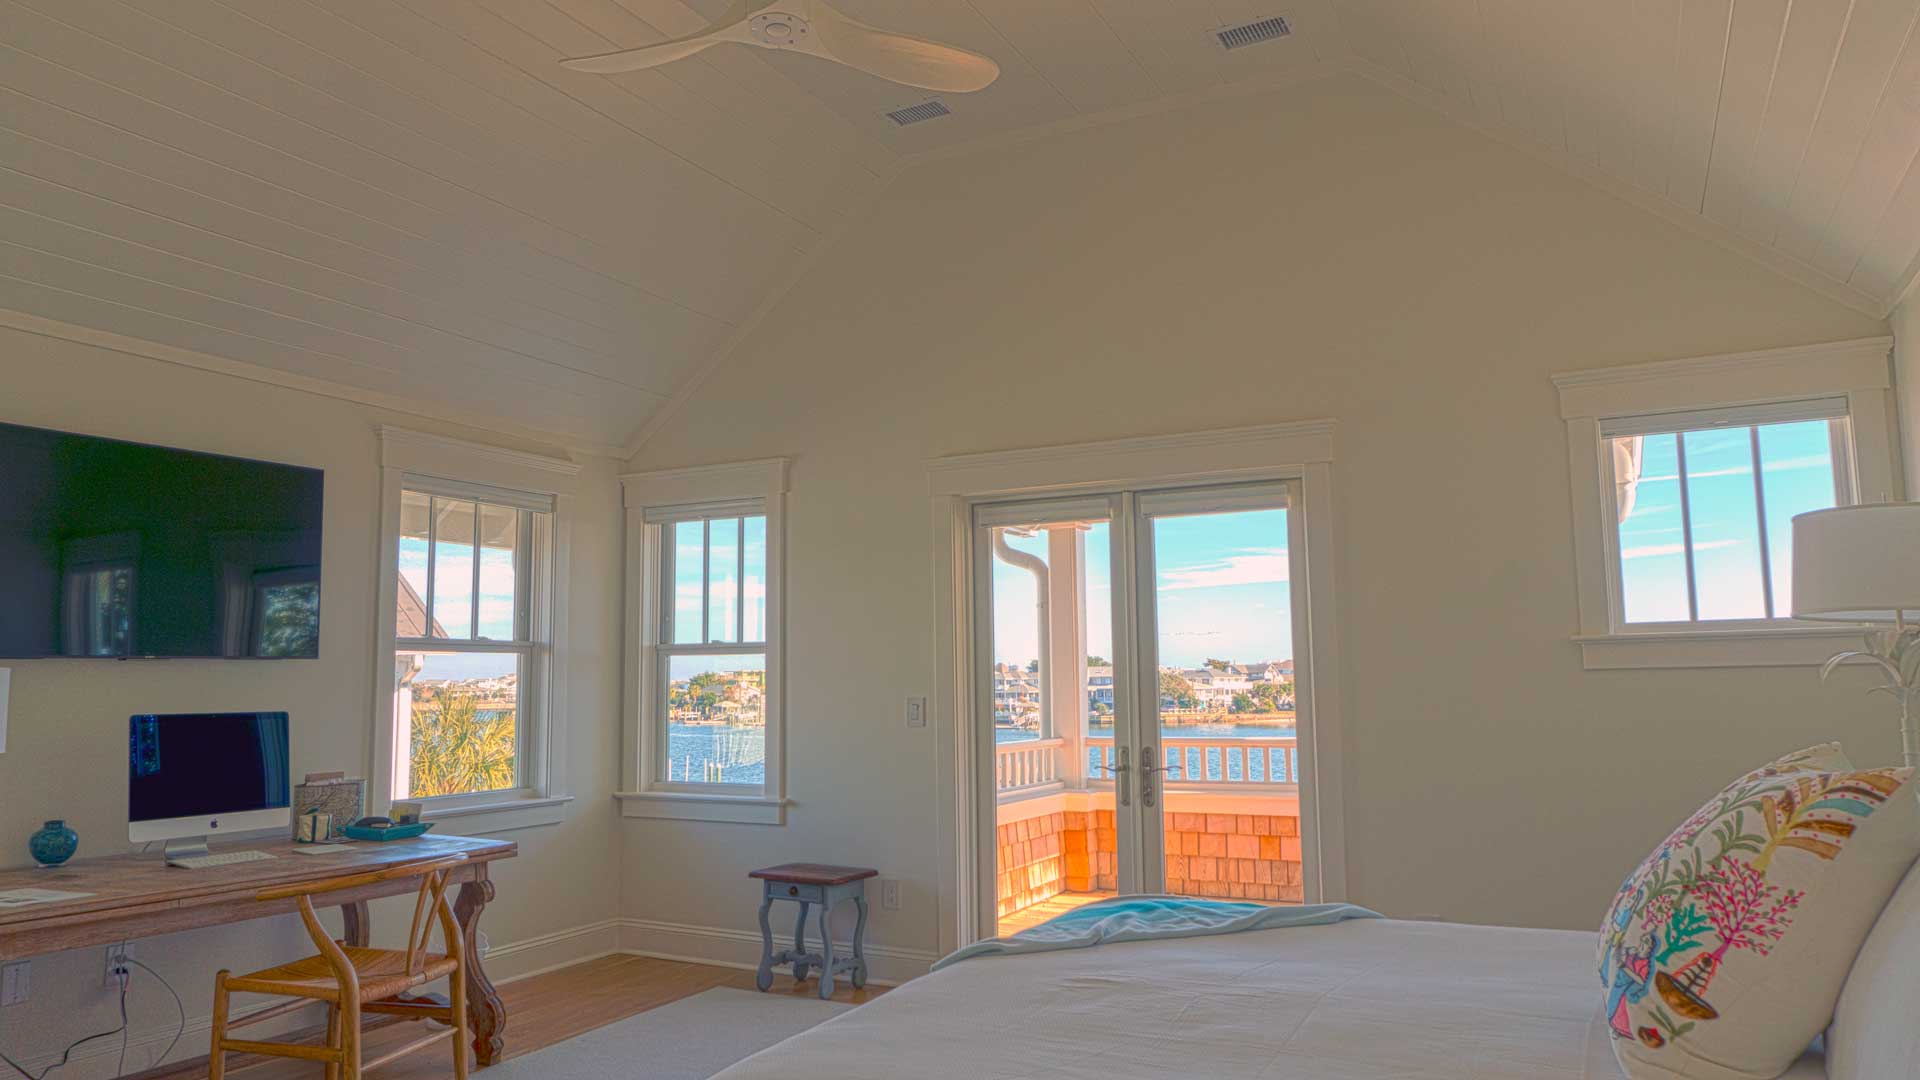 Photo of Master Bedroom of Wrightsville Beach Remodel Banks Channel